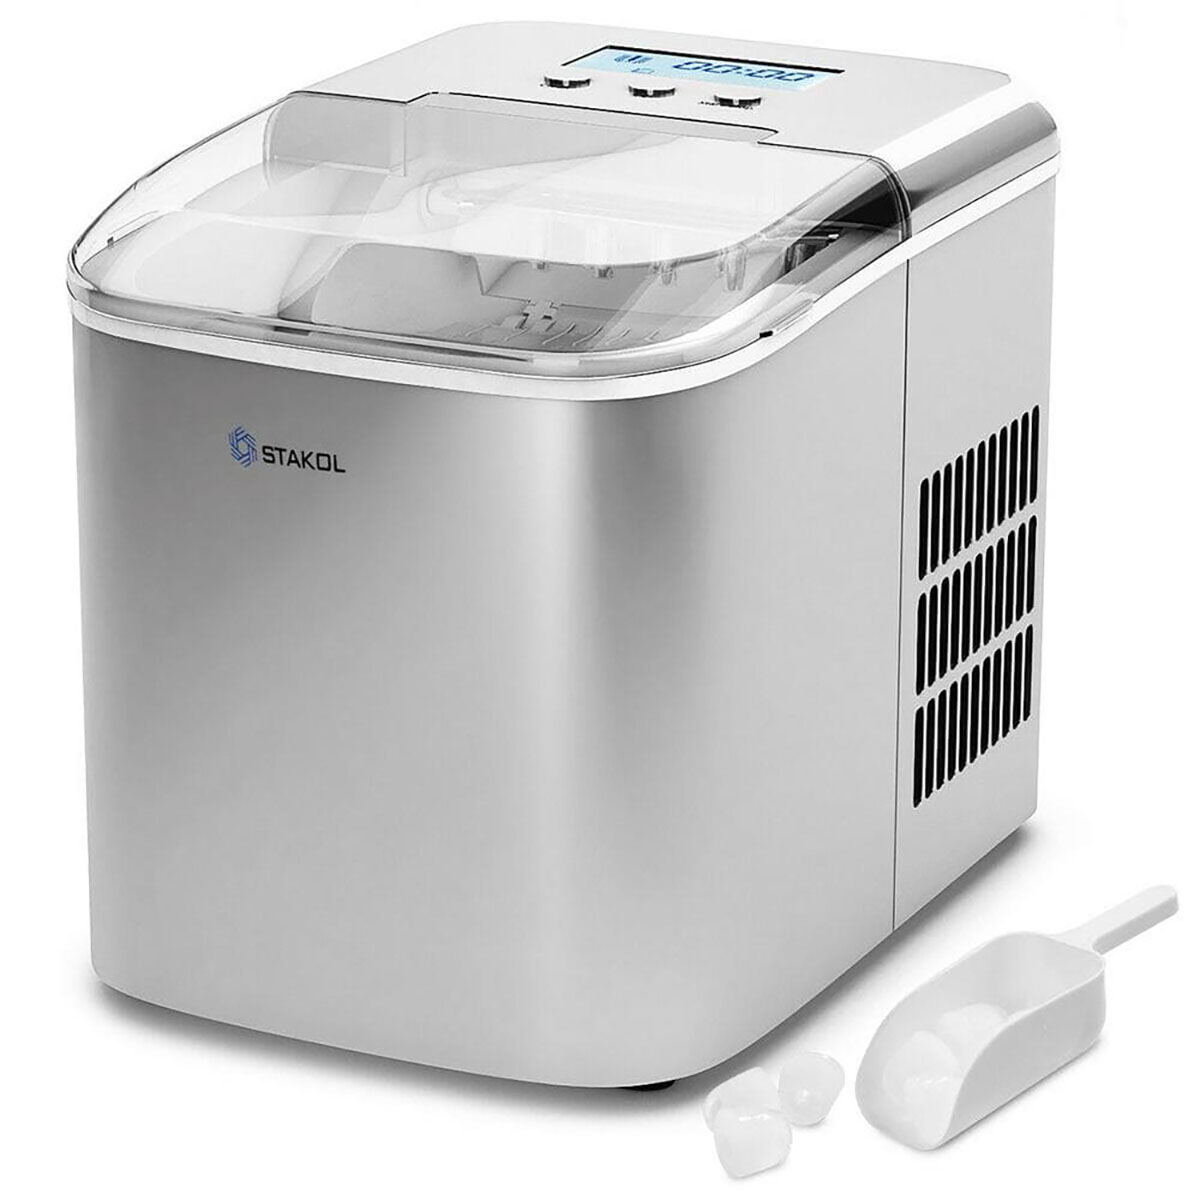 Photos - Freezer Stakol 26-Pound Countertop LCD Ice Maker with Ice Scoop - Silver EP23840